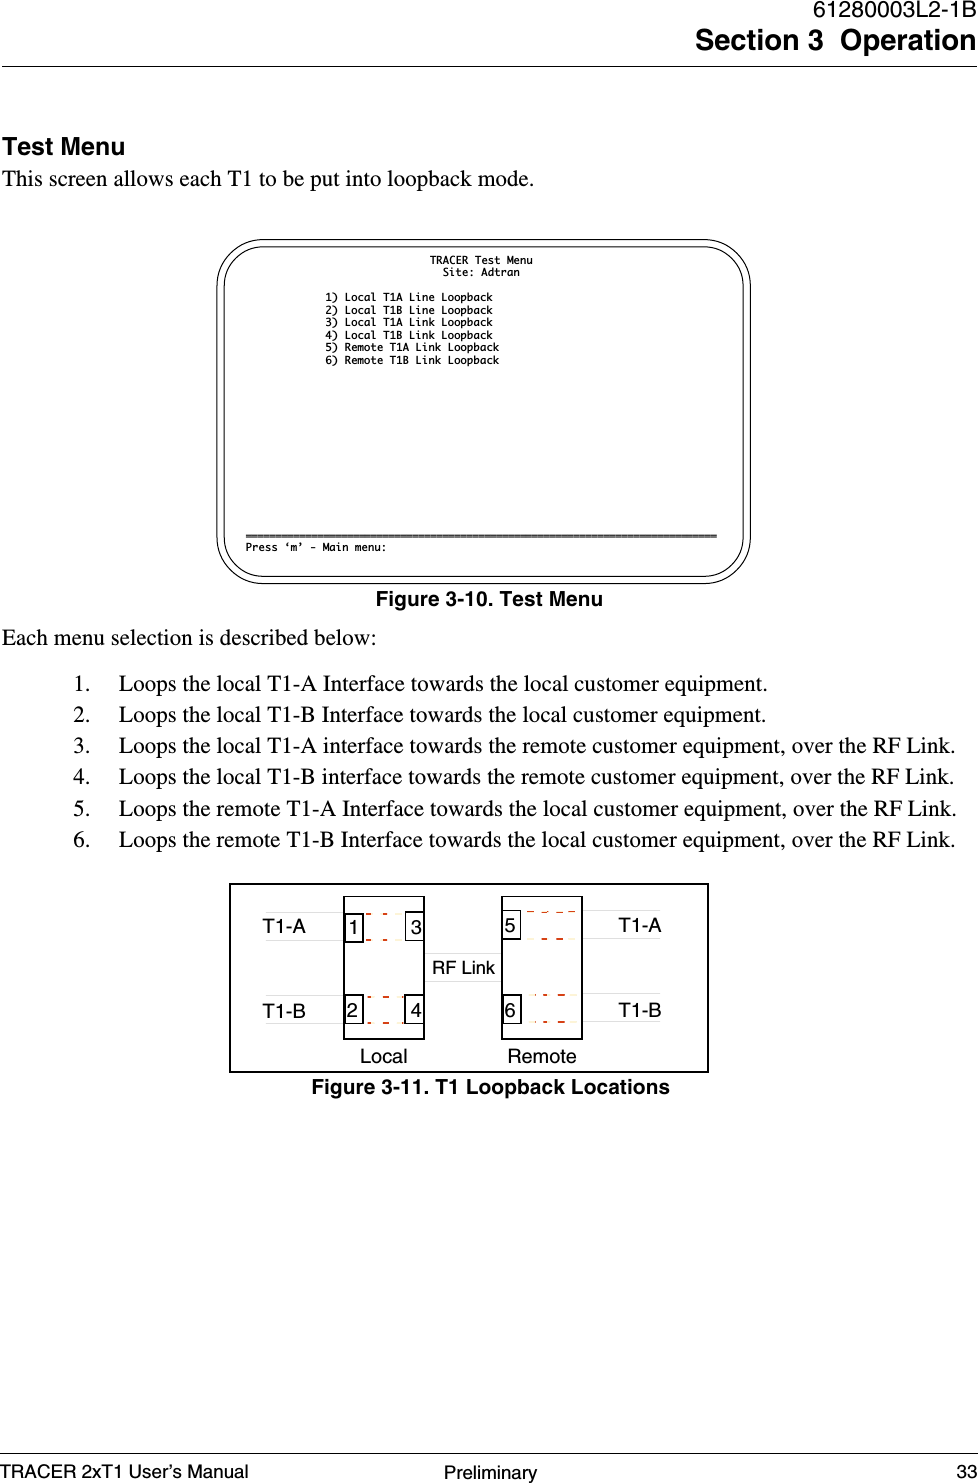 TRACER 2xT1 User’s Manual61280003L2-1BSection 3  Operation33PreliminaryTest MenuThis screen allows each T1 to be put into loopback mode.Each menu selection is described below:1. Loops the local T1-A Interface towards the local customer equipment.2. Loops the local T1-B Interface towards the local customer equipment.3. Loops the local T1-A interface towards the remote customer equipment, over the RF Link.4. Loops the local T1-B interface towards the remote customer equipment, over the RF Link.5. Loops the remote T1-A Interface towards the local customer equipment, over the RF Link.6. Loops the remote T1-B Interface towards the local customer equipment, over the RF Link.Figure 3-10. Test MenuTRACER Test MenuSite: Adtran1) Local T1A Line Loopback2) Local T1B Line Loopback3) Local T1A Link Loopback4) Local T1B Link Loopback5) Remote T1A Link Loopback6) Remote T1B Link Loopback===============================================================================Press ‘m’ - Main menu:Figure 3-11. T1 Loopback LocationsLocalT1-AT1-BRemoteT1-AT1-BRF Link346125